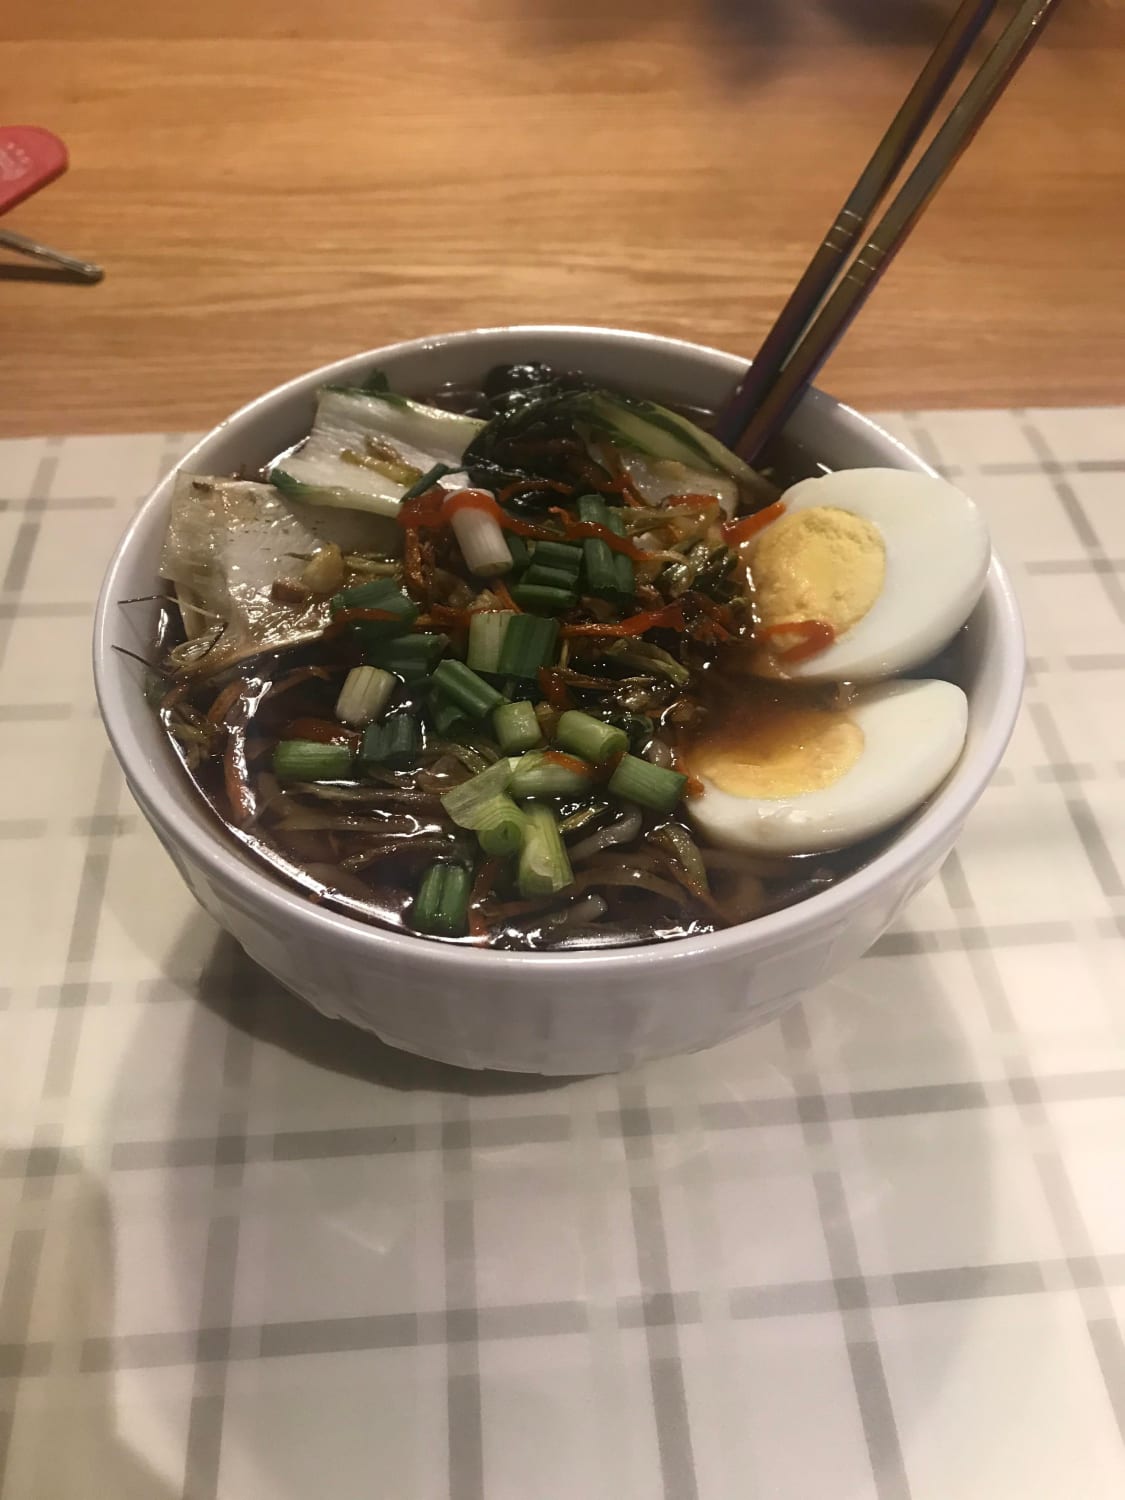 Shoyu ramen with first batch of noodles from scratch with bok choy, shredded carrots and cabbage, garlic, and ginger sautéed in sesame oil. Tare is from scratch as well